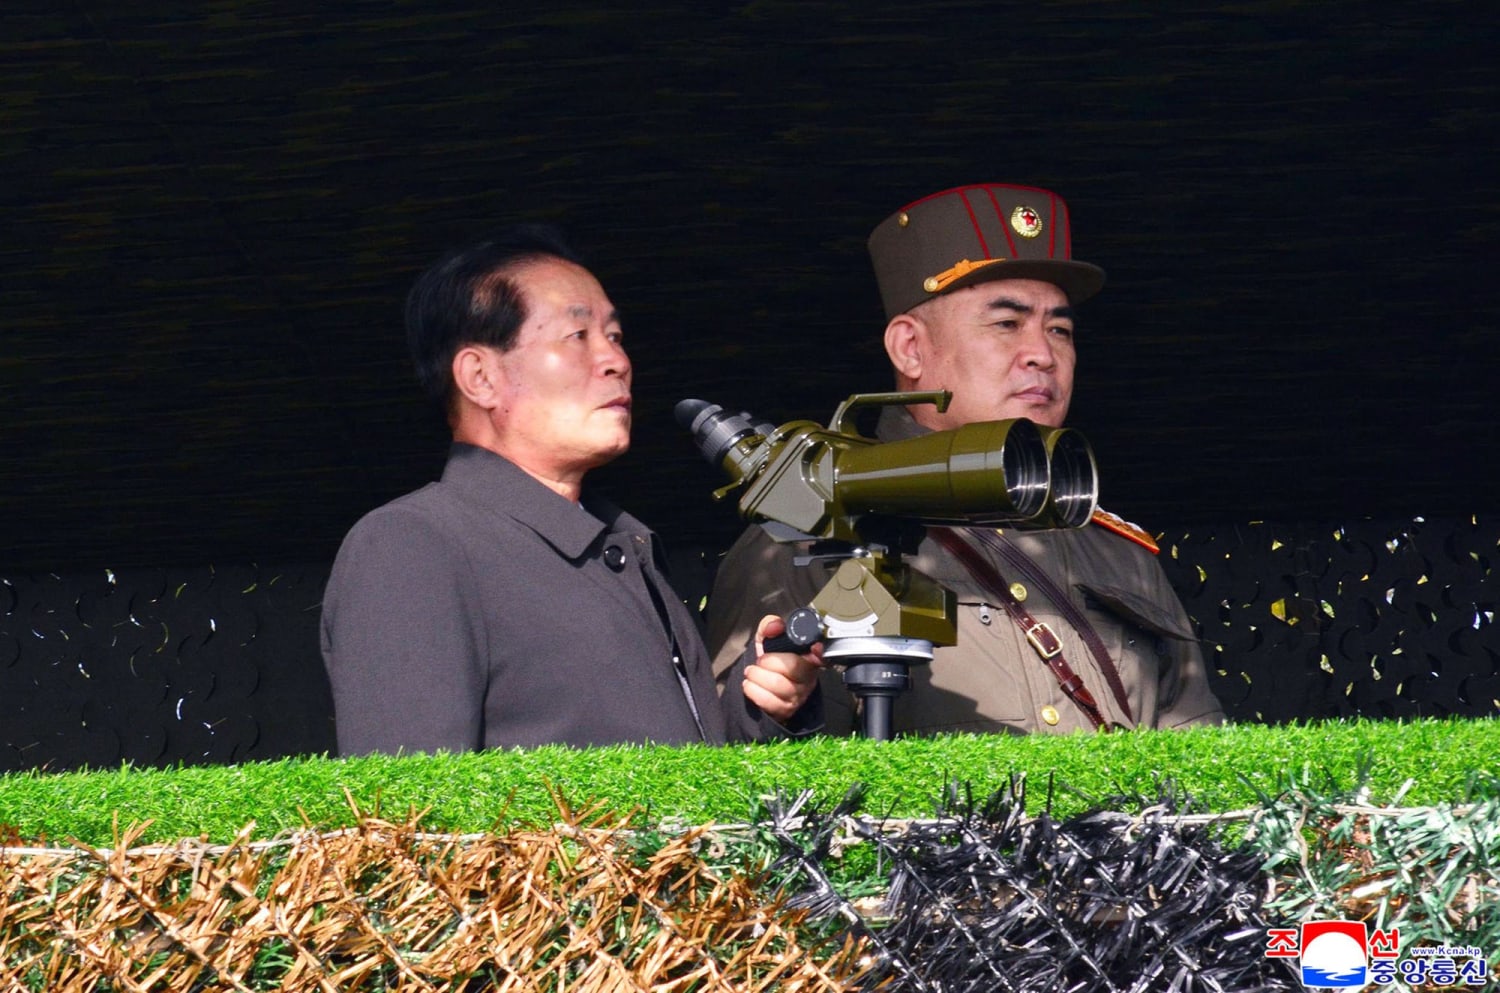 North Korea stages artillery firing drill in latest show of strength